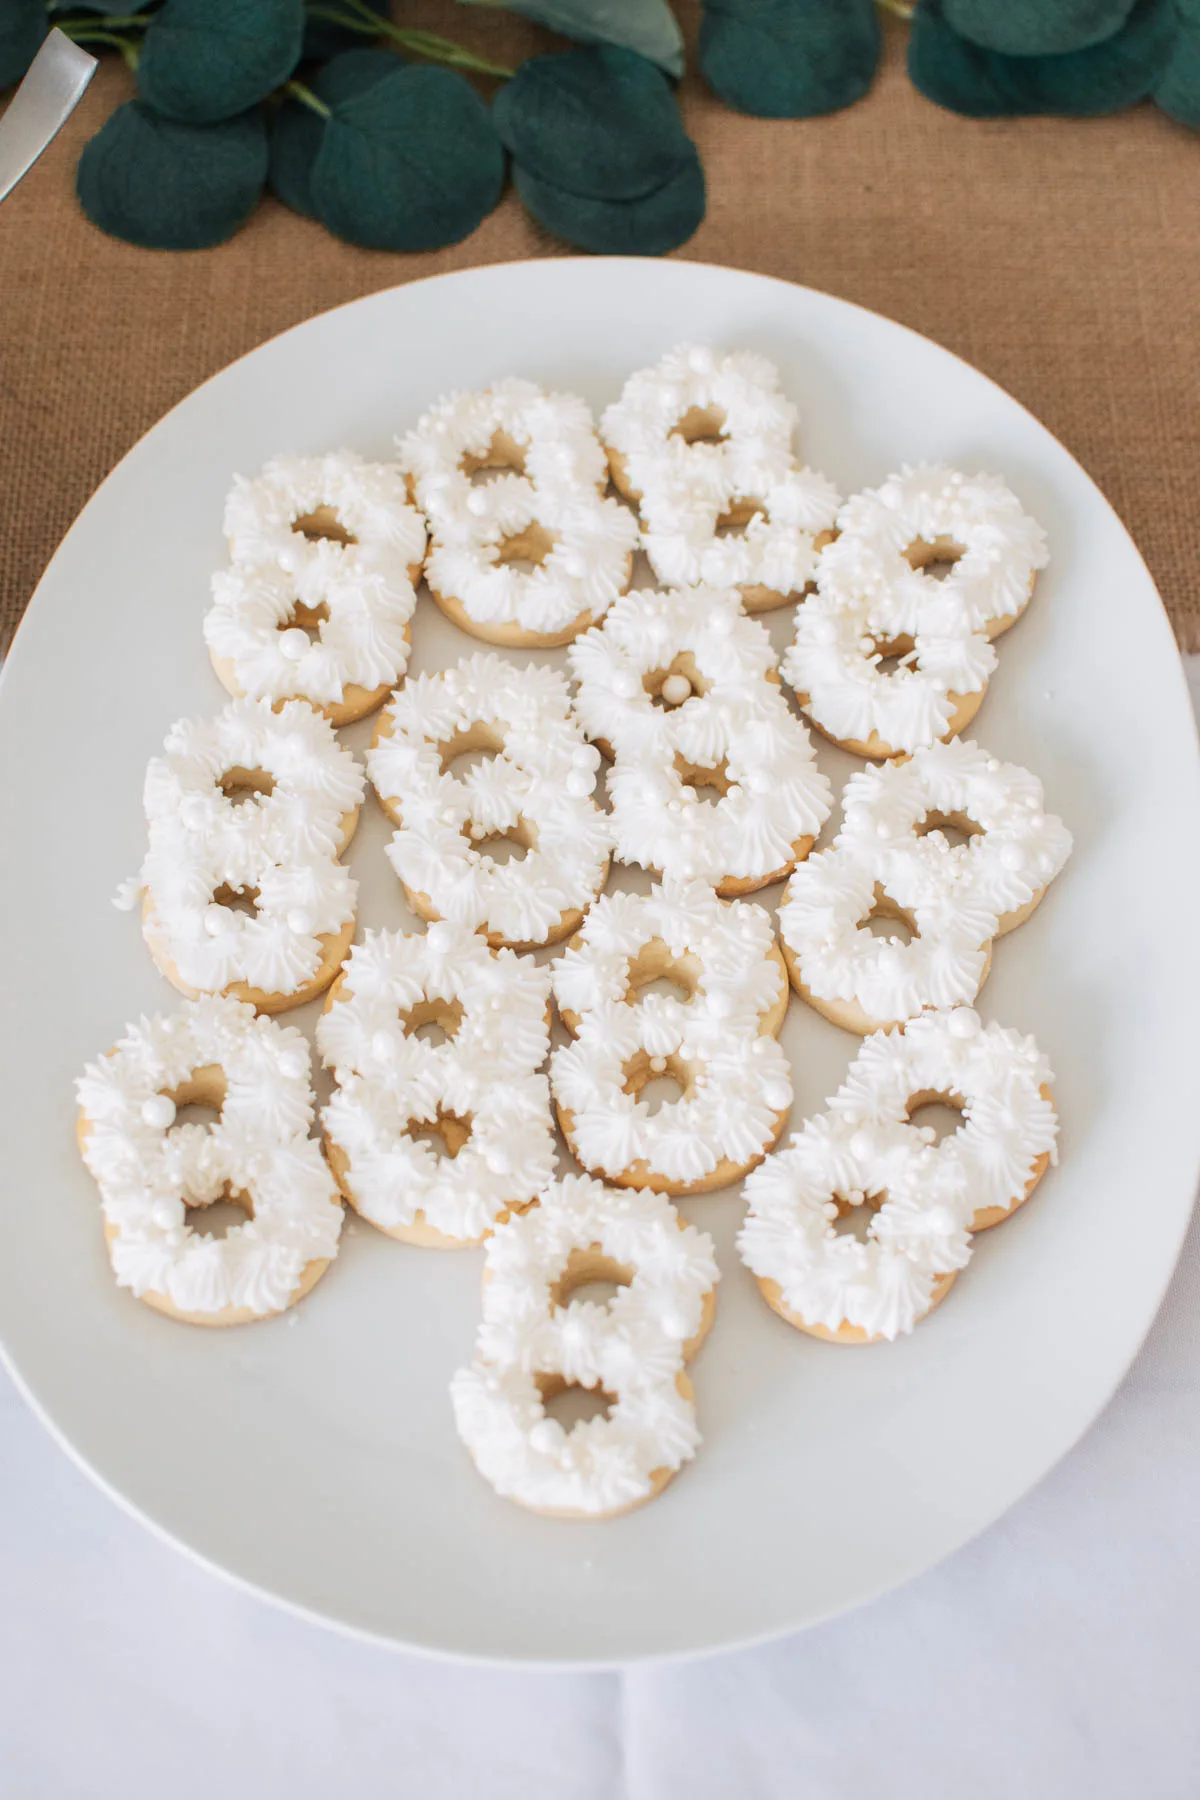 Several number 8 sugar cookies with white frosting and sprinkles on white platter.